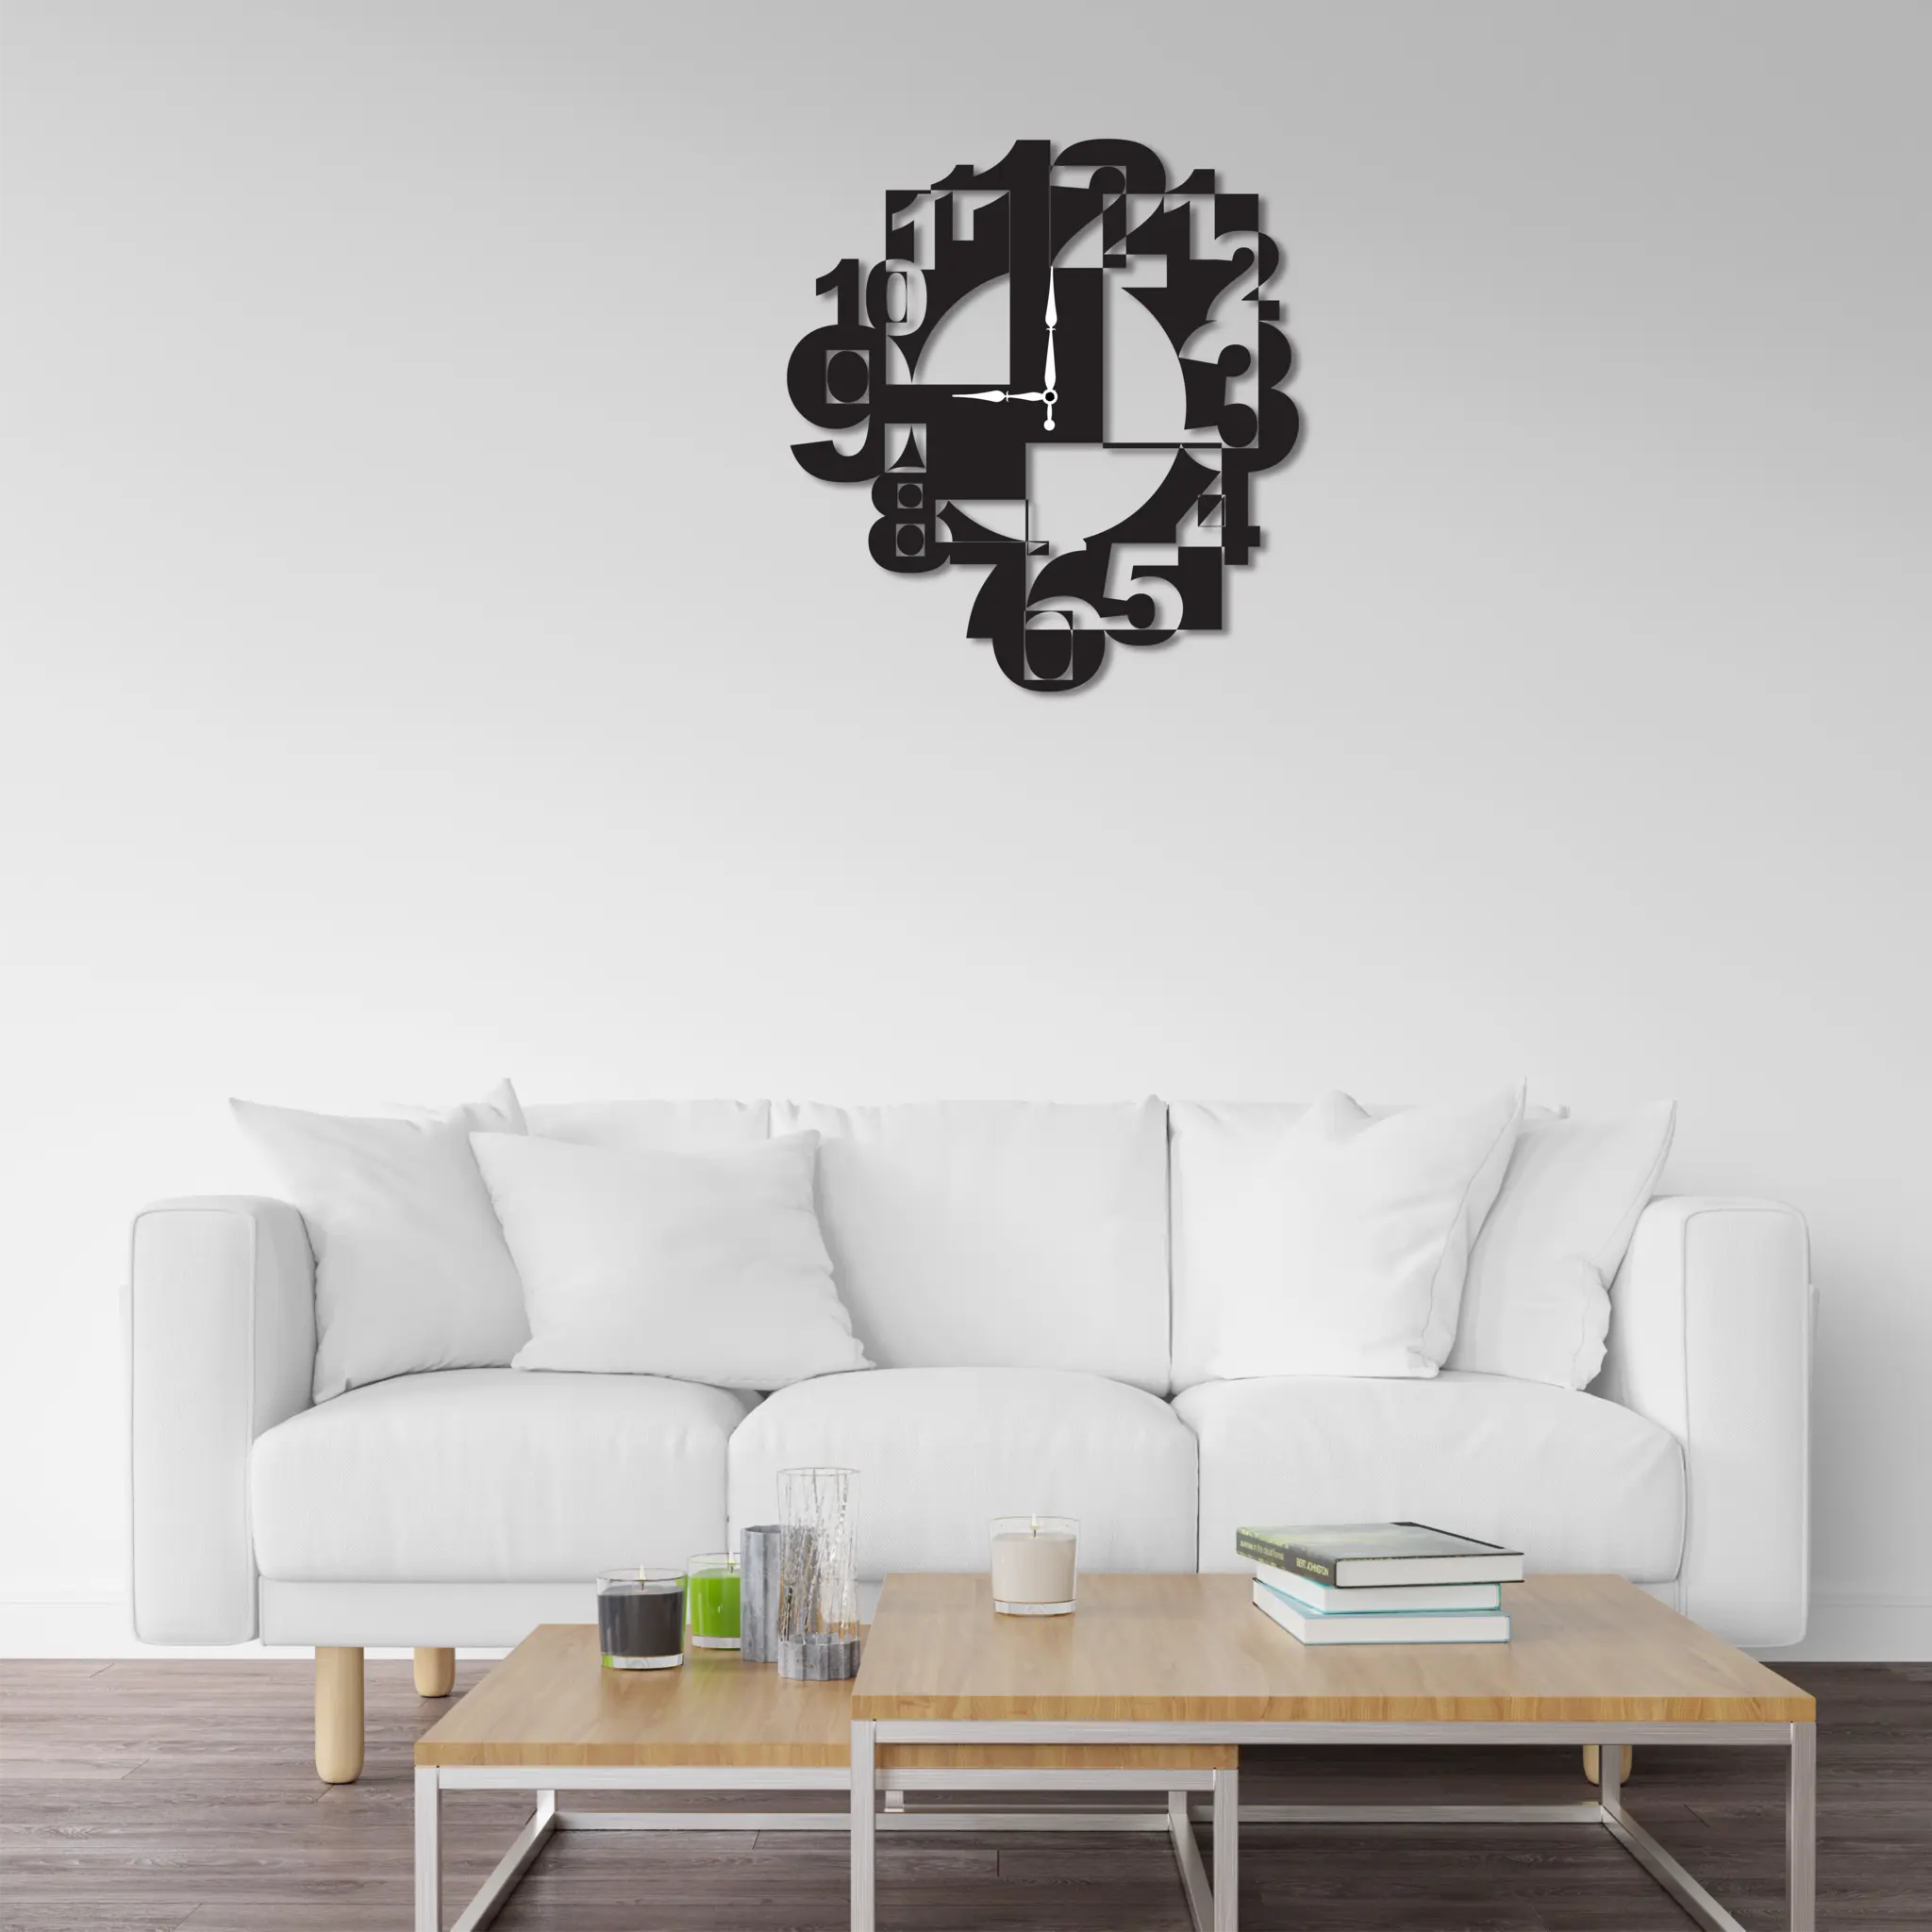 Wall Clock with Big Numbers, Metal Modern Design, Expansive Design, Metal Construction, Numbers Display, Industrial Wall Clock, New House Present